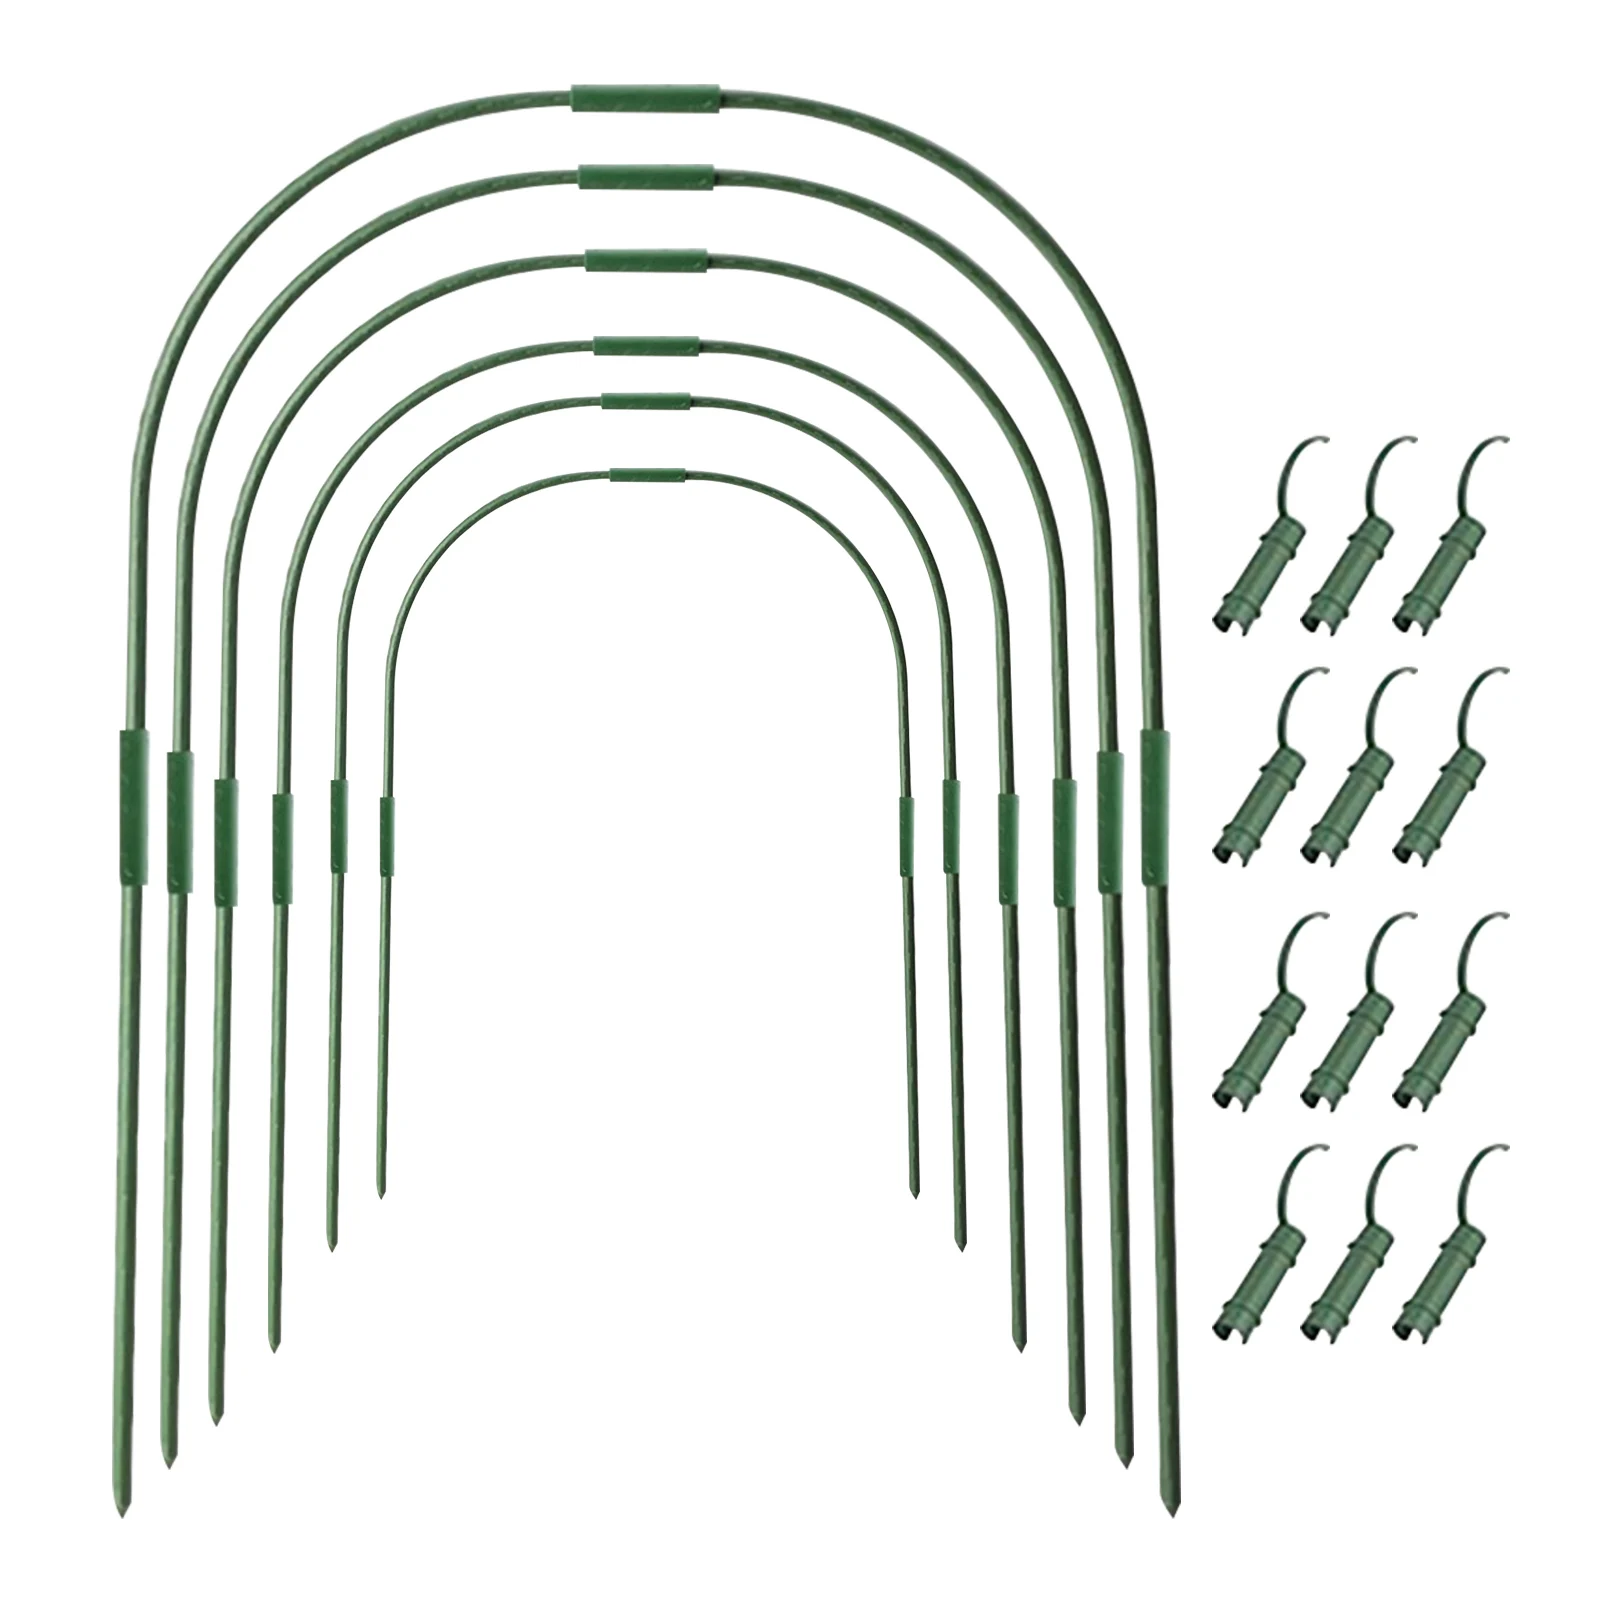 

54pcs Greenhouse Hoop Set Sturdy Tunnel Frame Growing Vegetable DIY Connector Plant Support Stakes Garden Row Cover Clip Steel